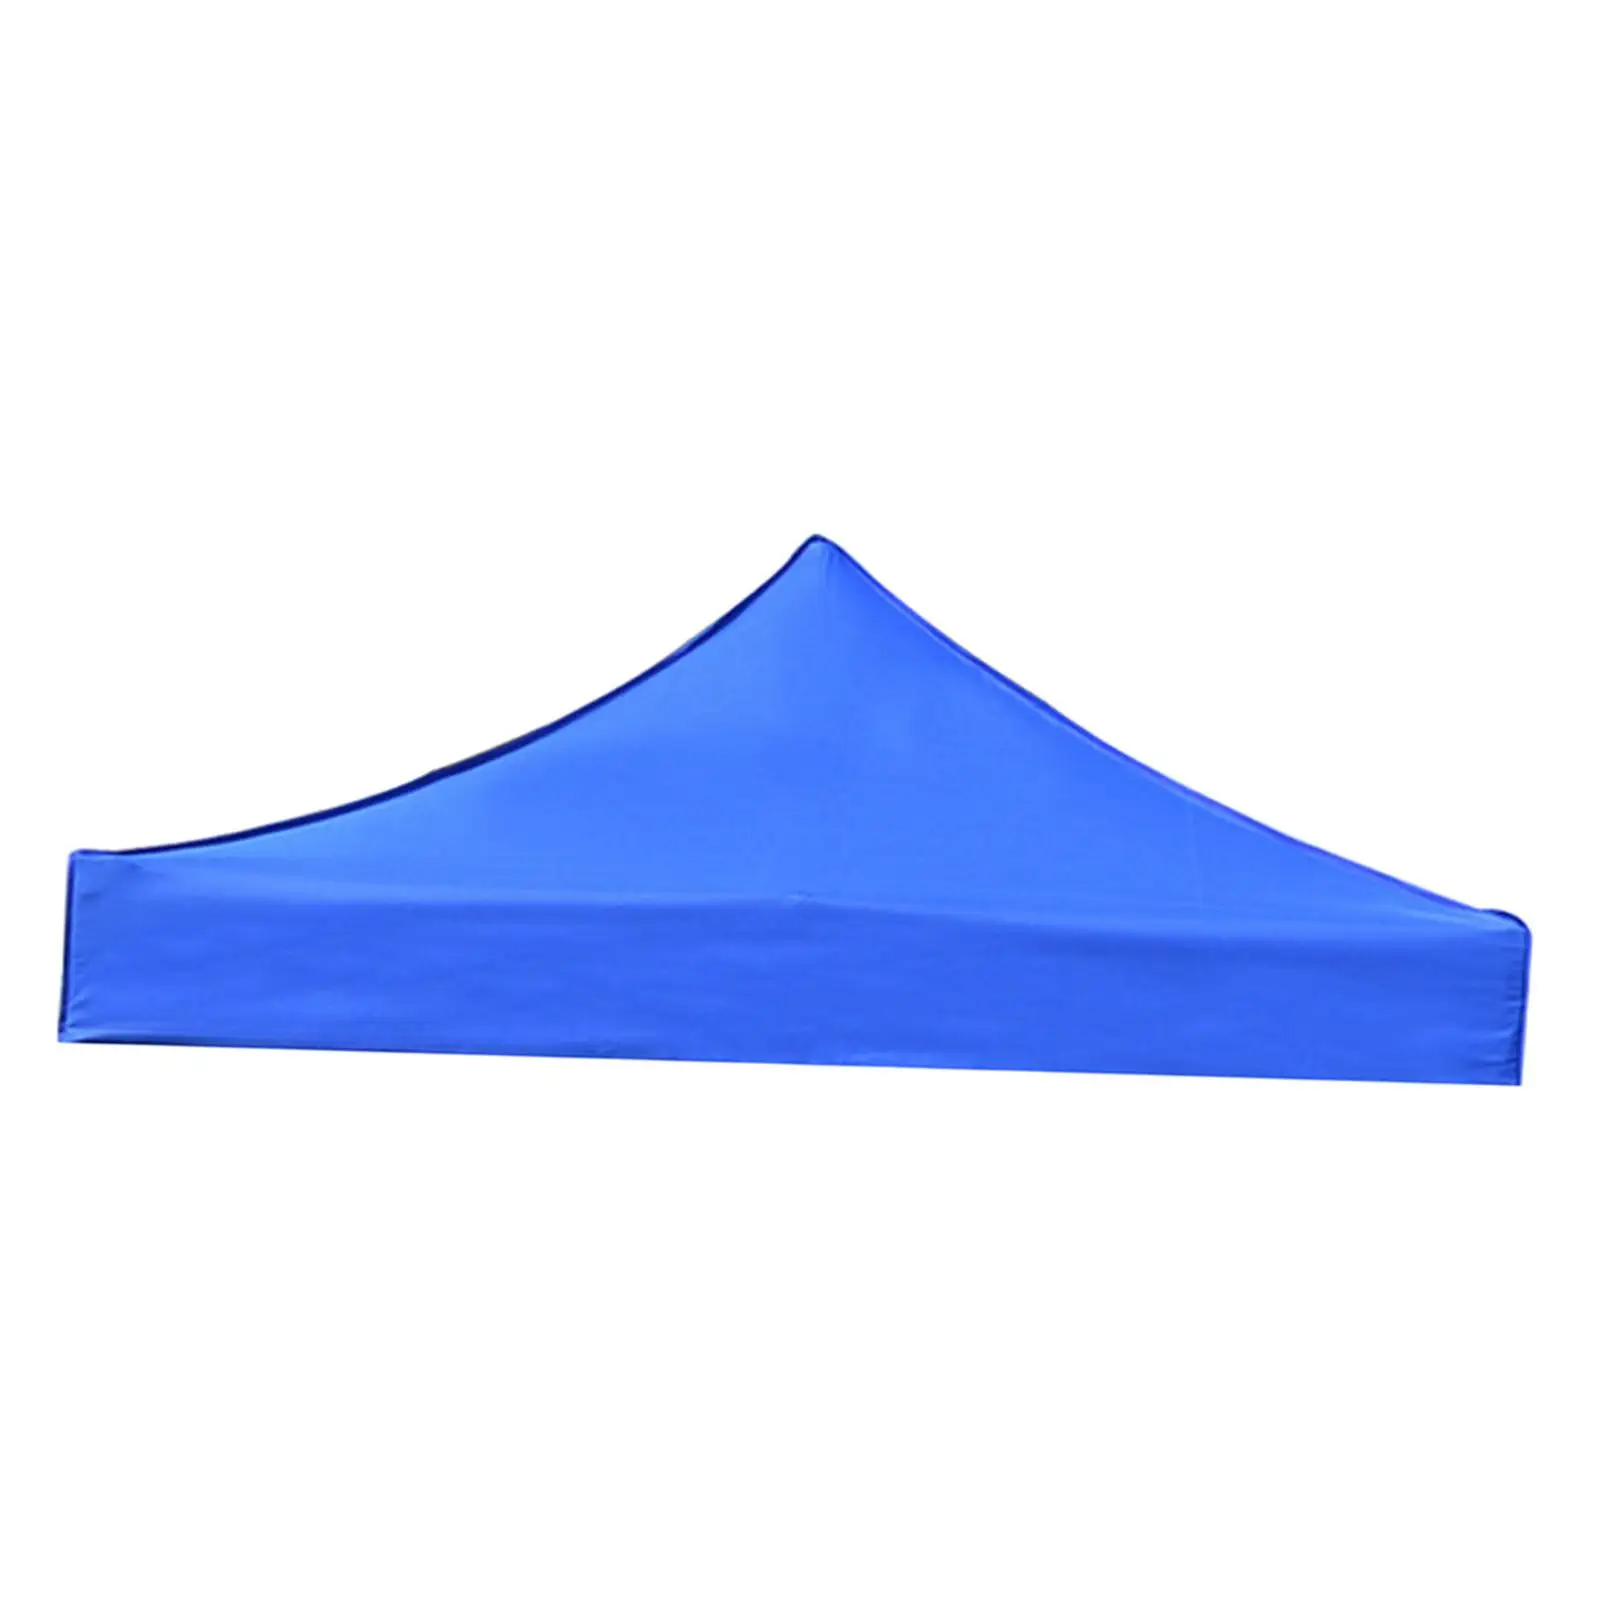 2.9MX2.9M Canopy Replacement Roof Cover Rainproof for Camping Hiking